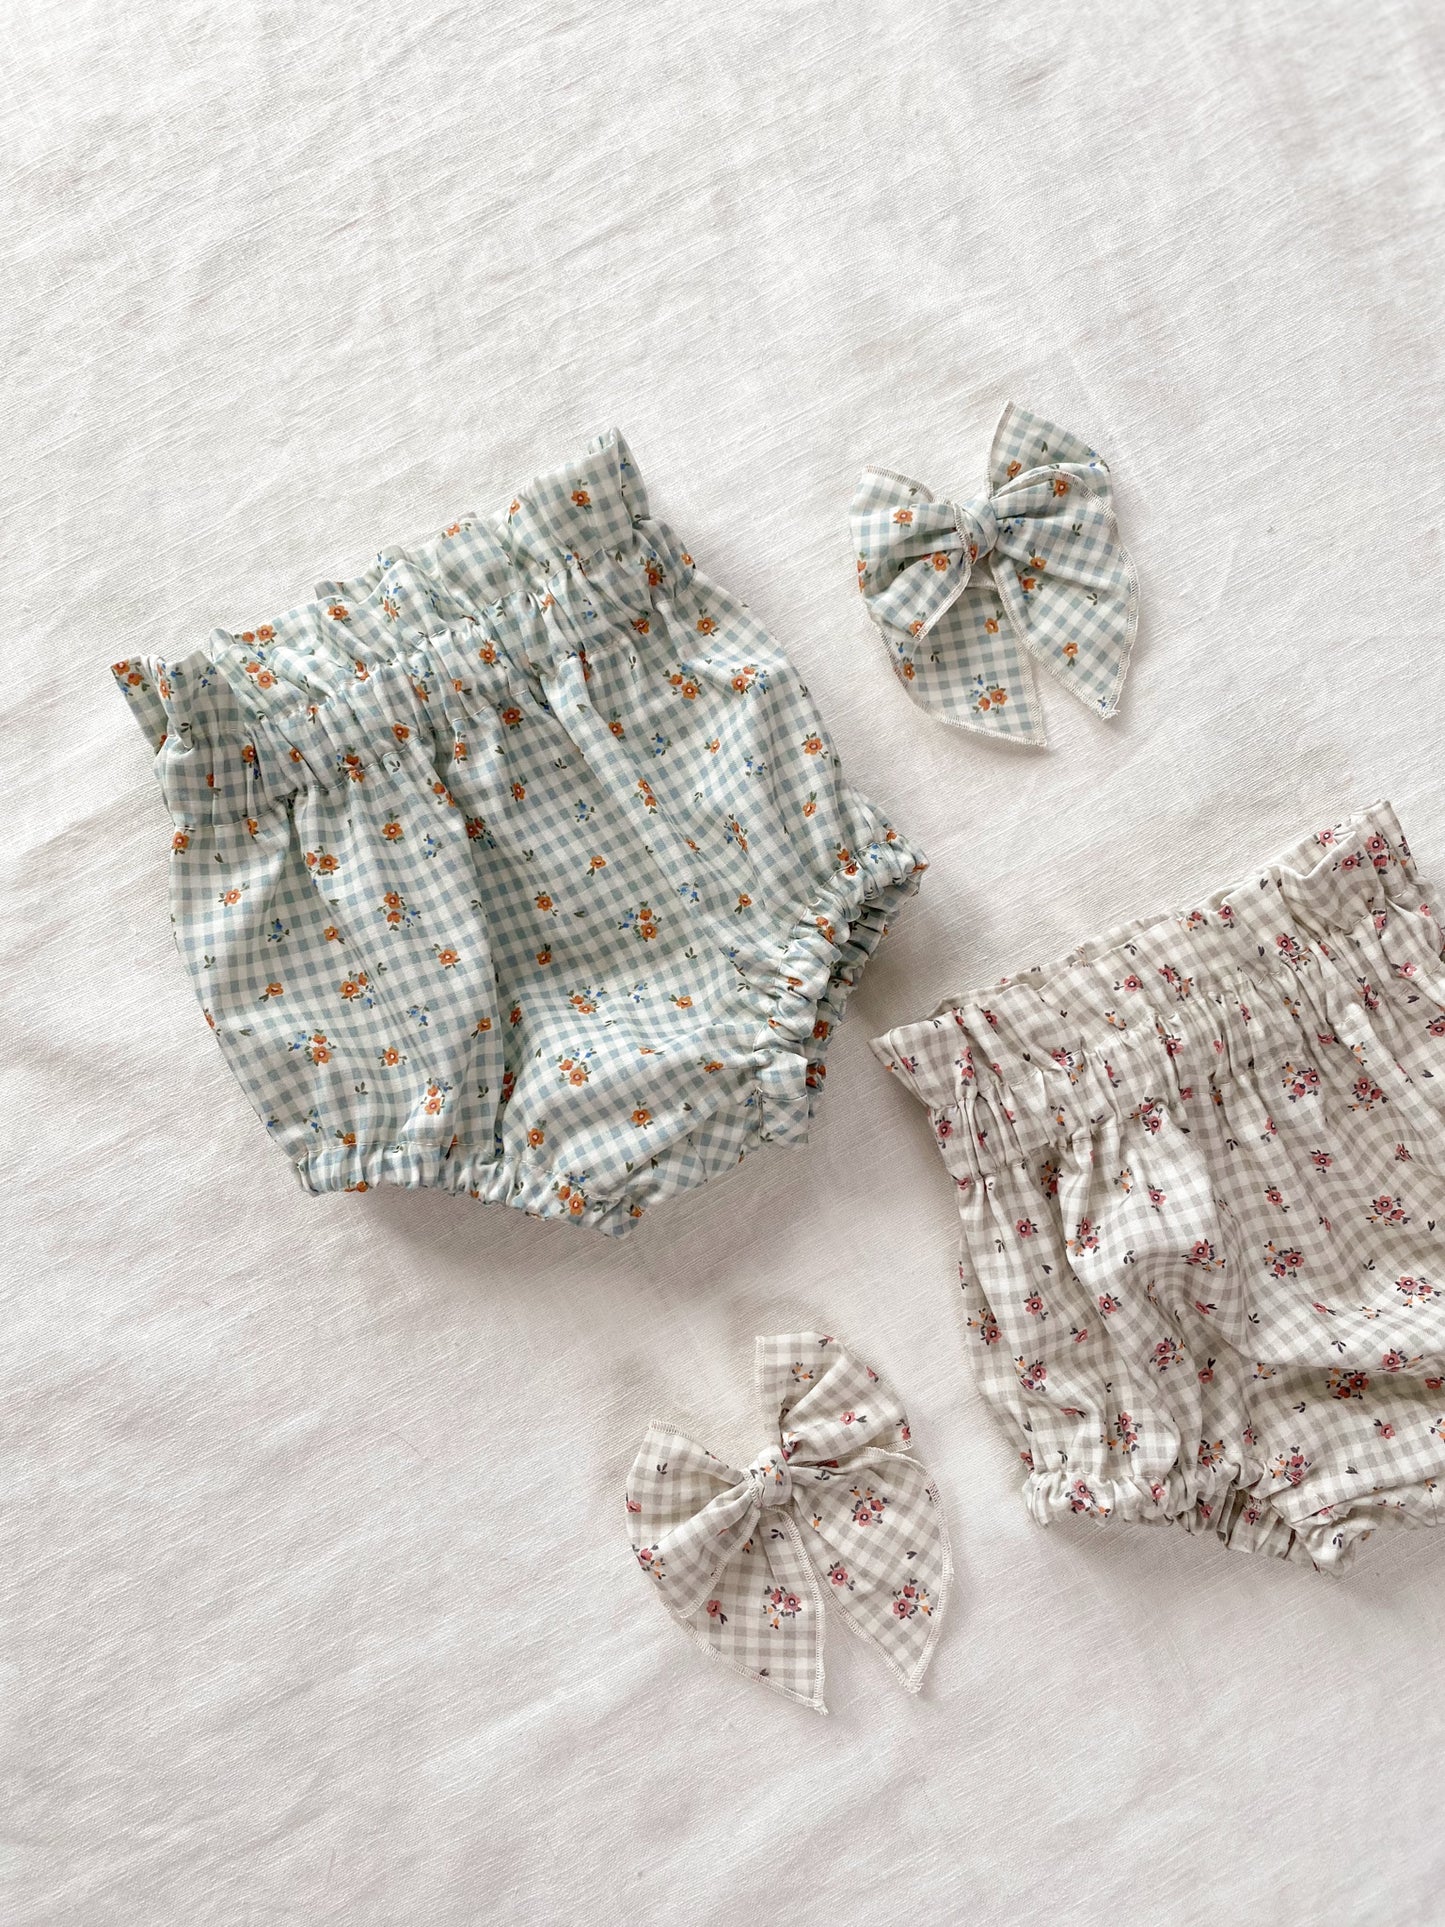 Floral Gingham Bloomers - rose